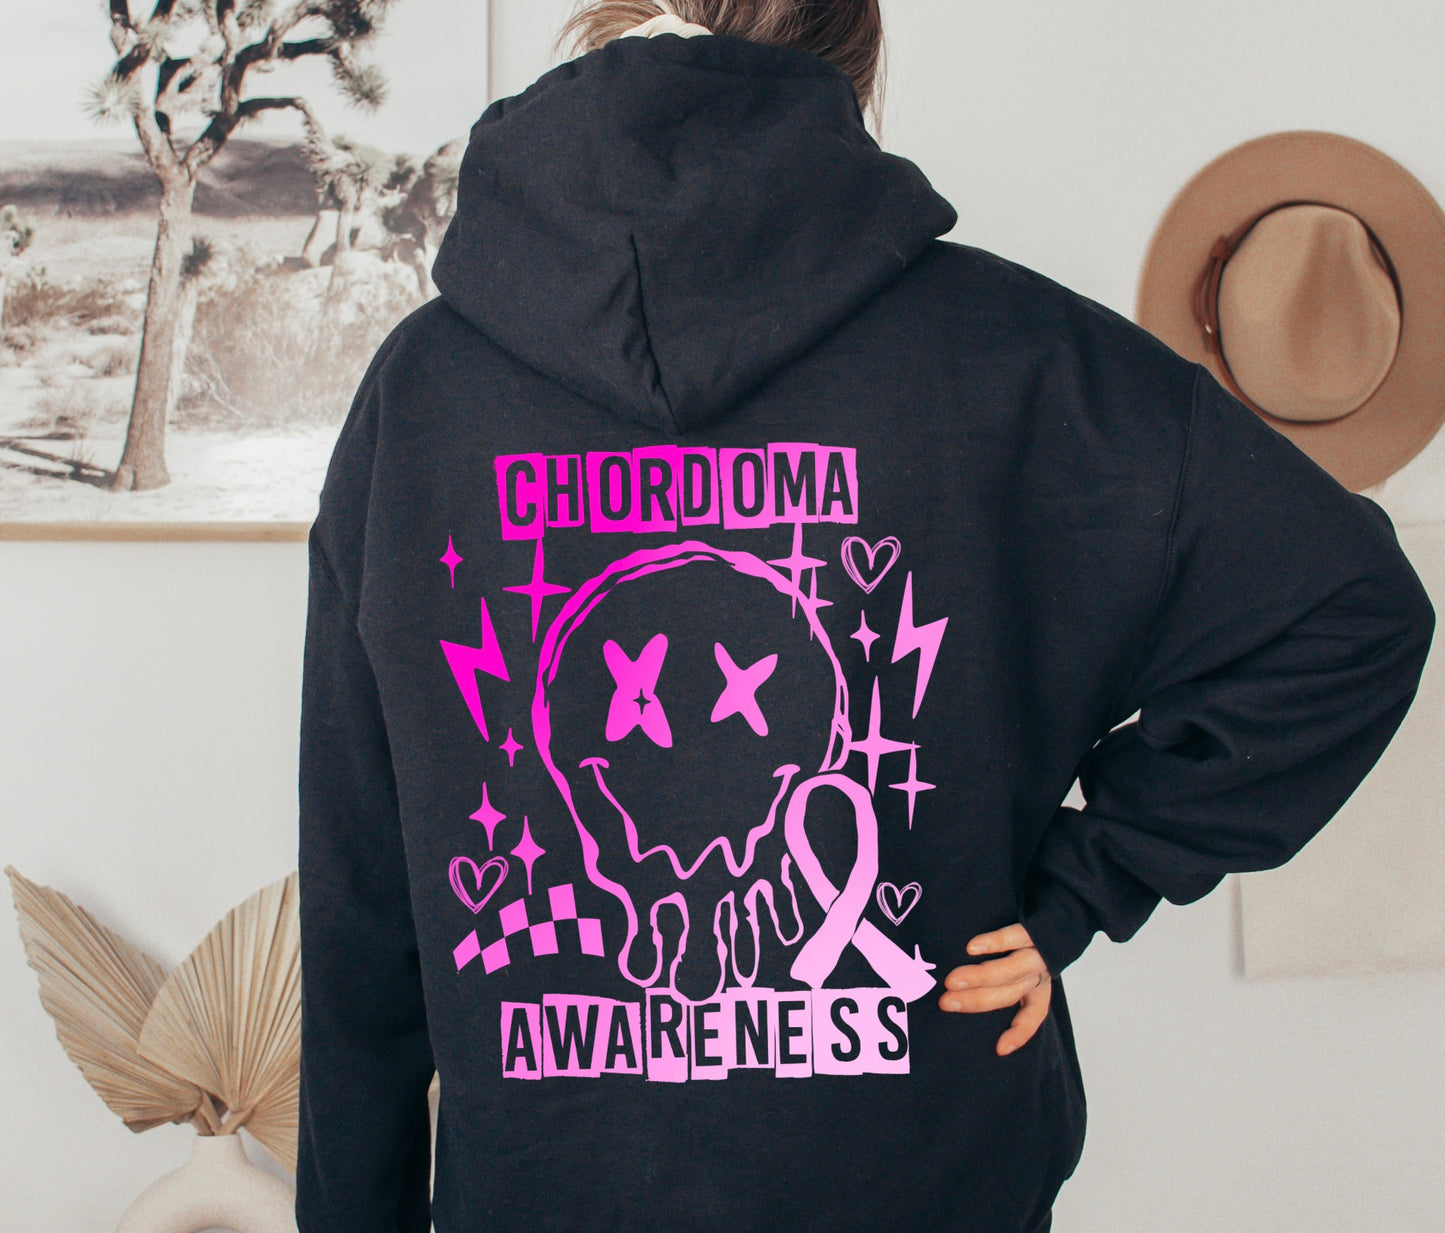 Chordoma Awareness (Millie’s Campaign)